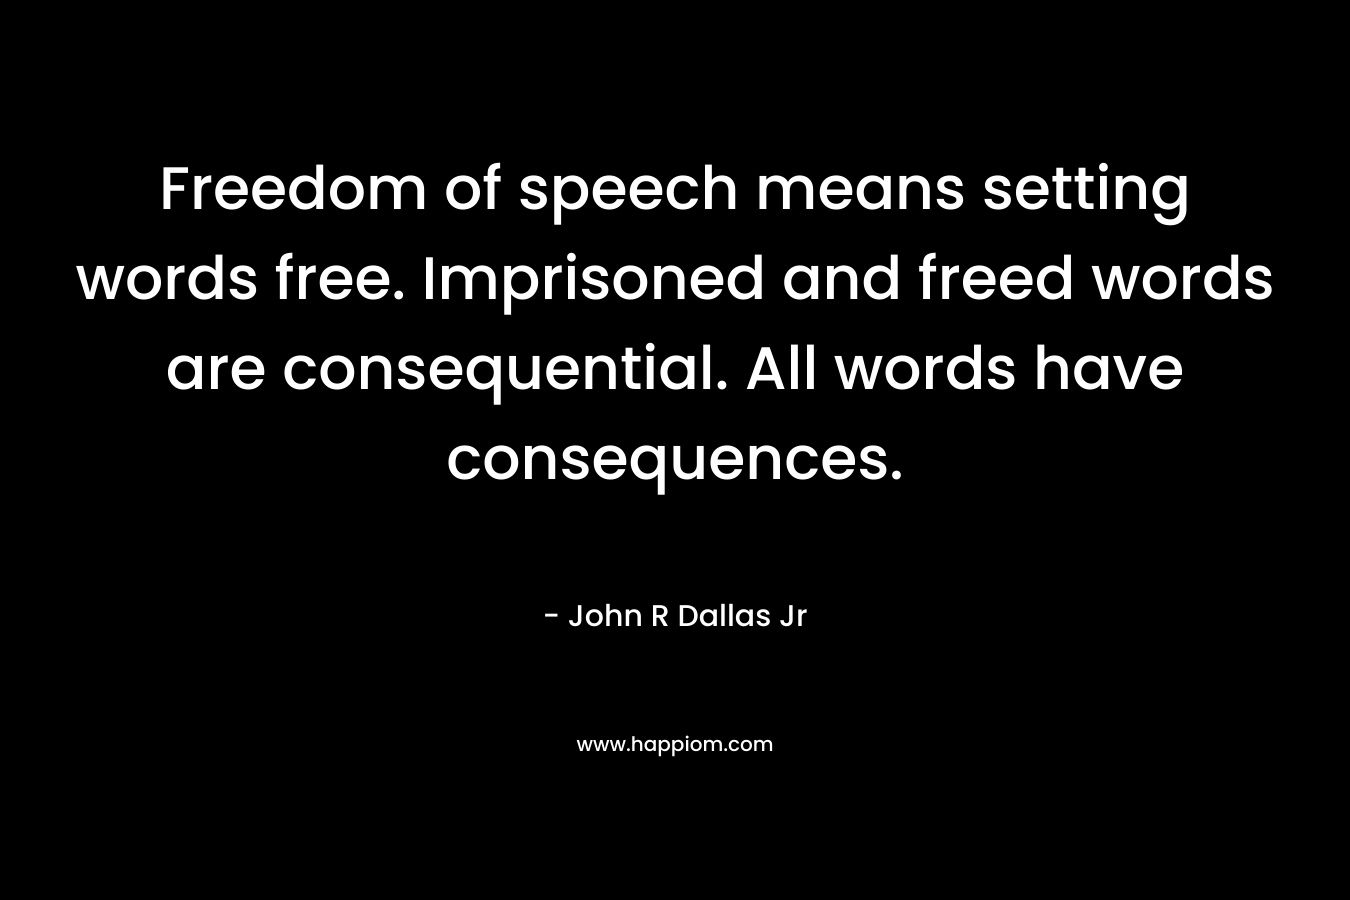 Freedom of speech means setting words free. Imprisoned and freed words are consequential. All words have consequences.